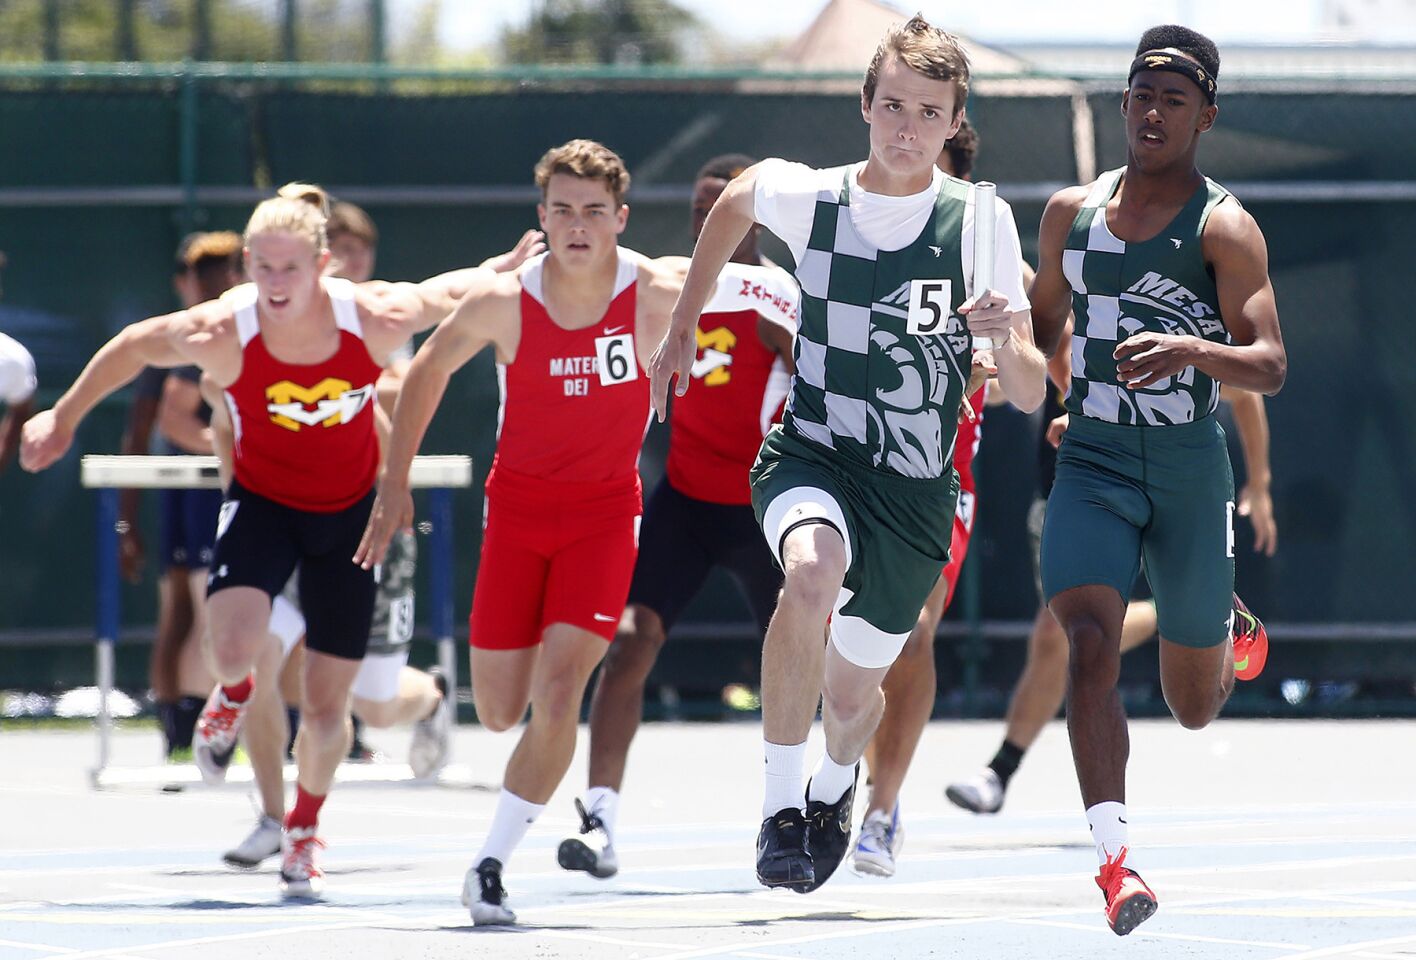 Murrieta Mesa's Ryan Wade takes the baton from teammate Shawn Williams to anchor their victory in the Divison 2 boys' 4x100-meter relay during the CIF Southern Section finals at Cerritos College.